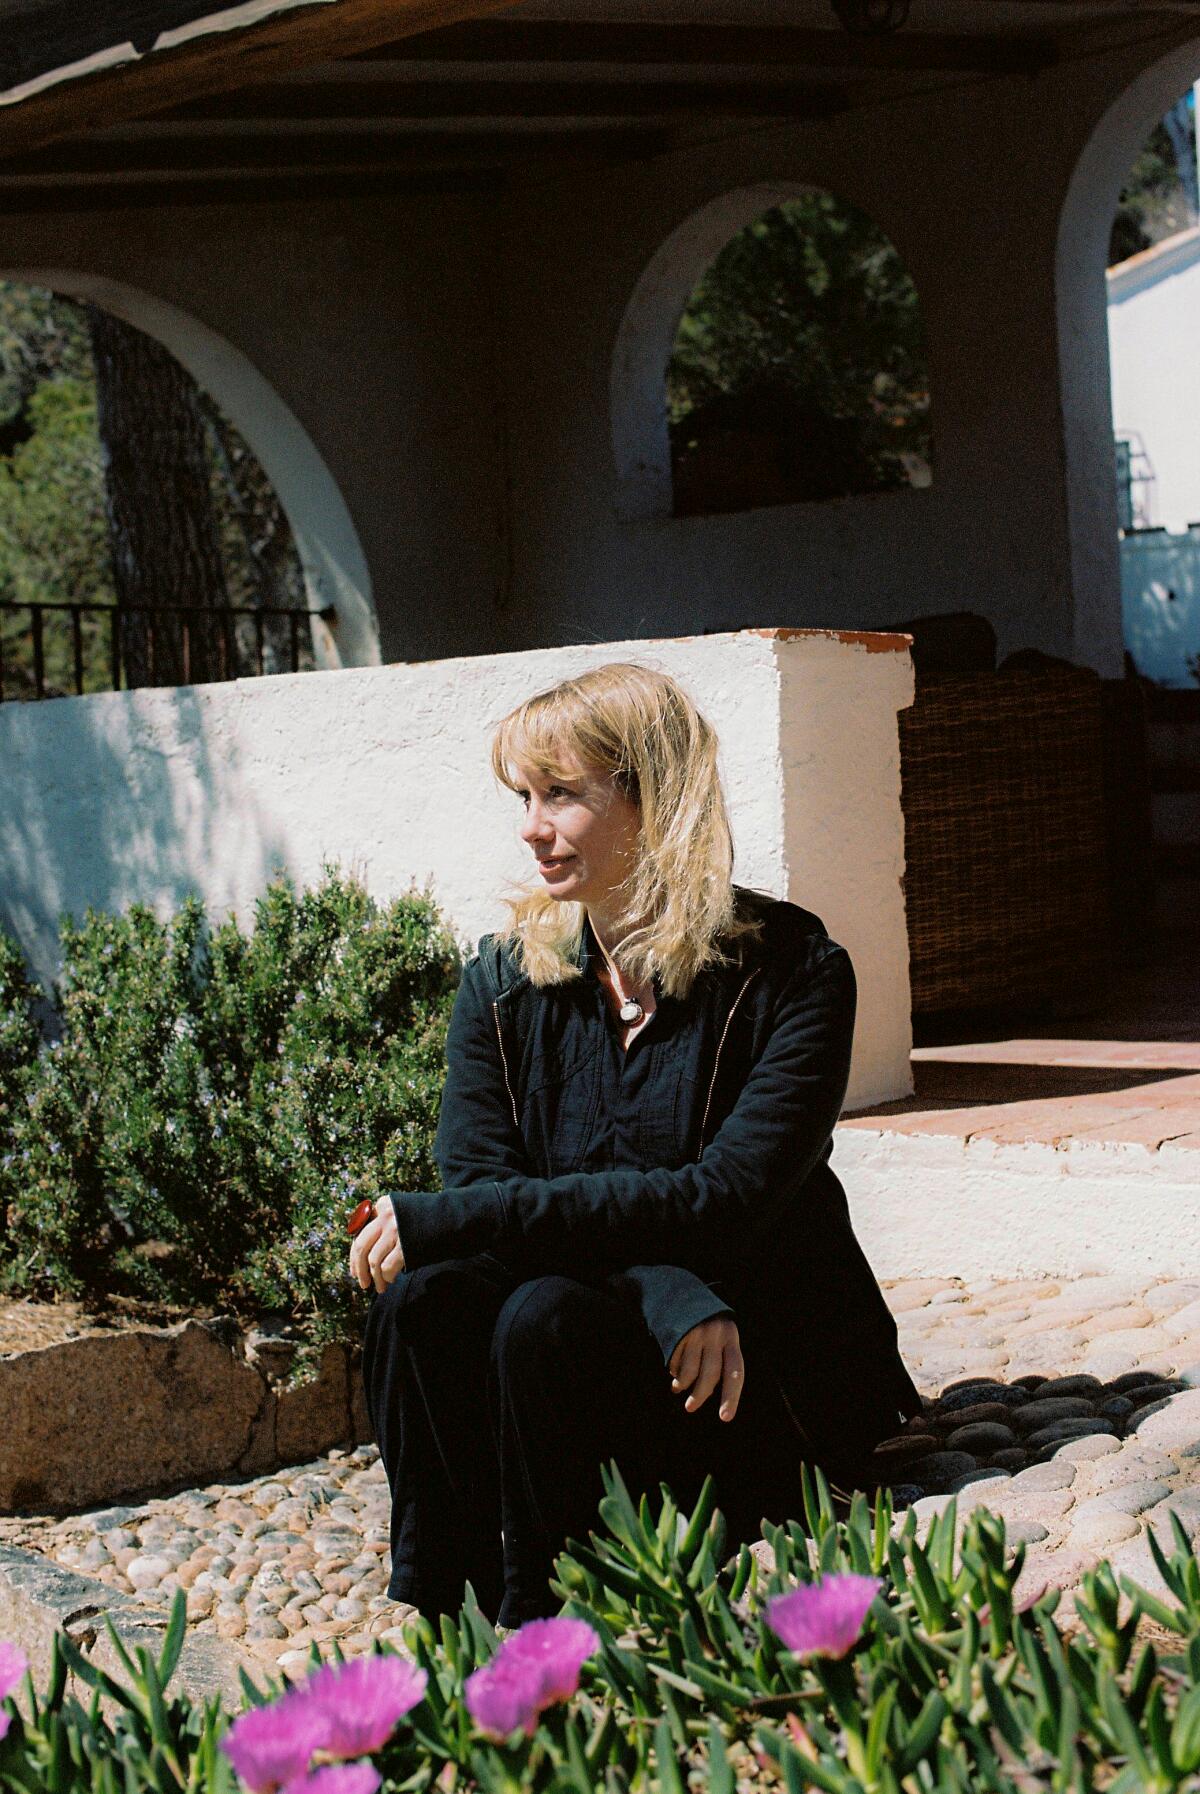 Writer Megan McDowell sits on steps in front of a patio